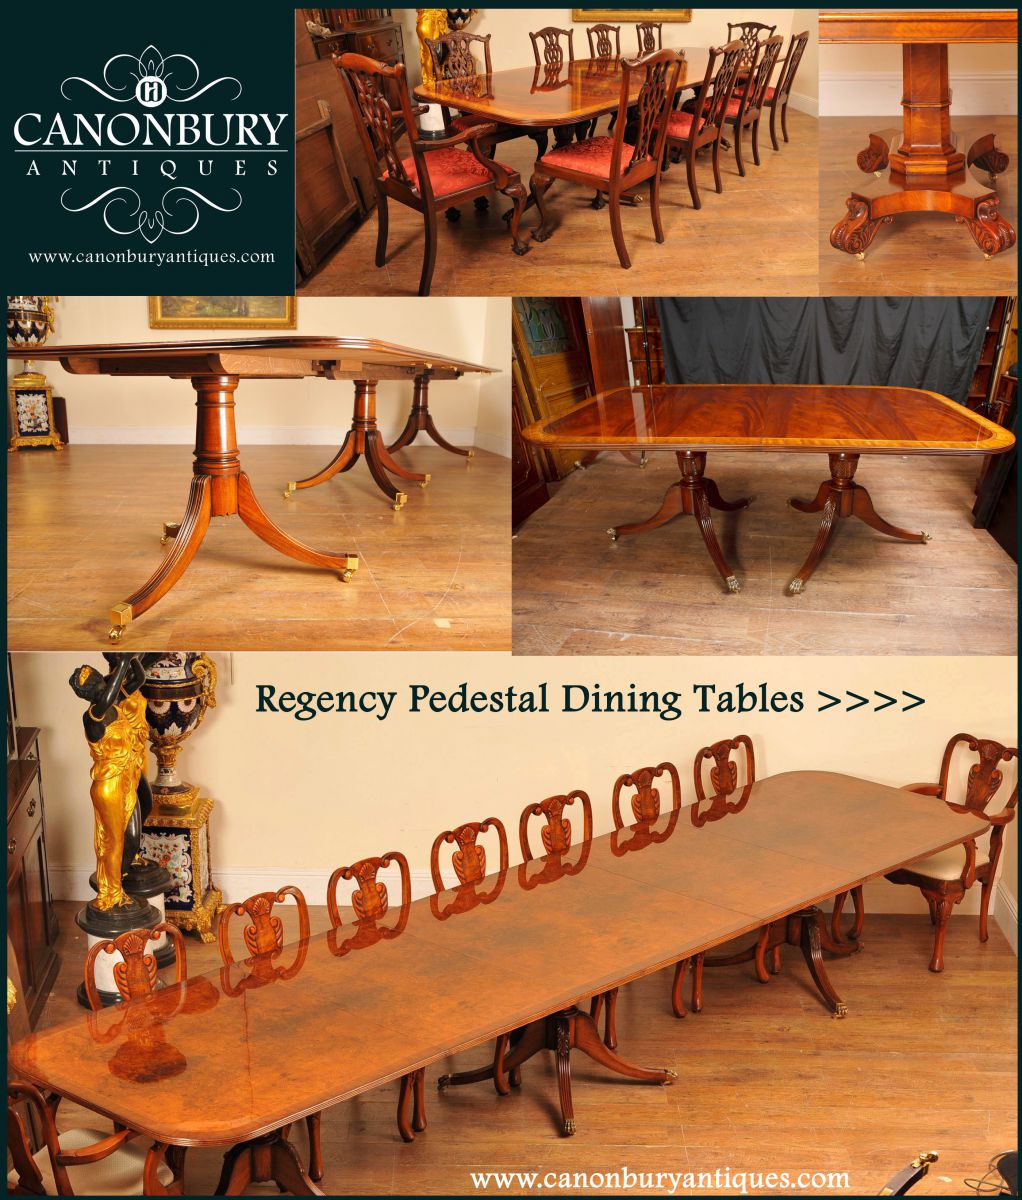 Regency dining tables - one of our specialities